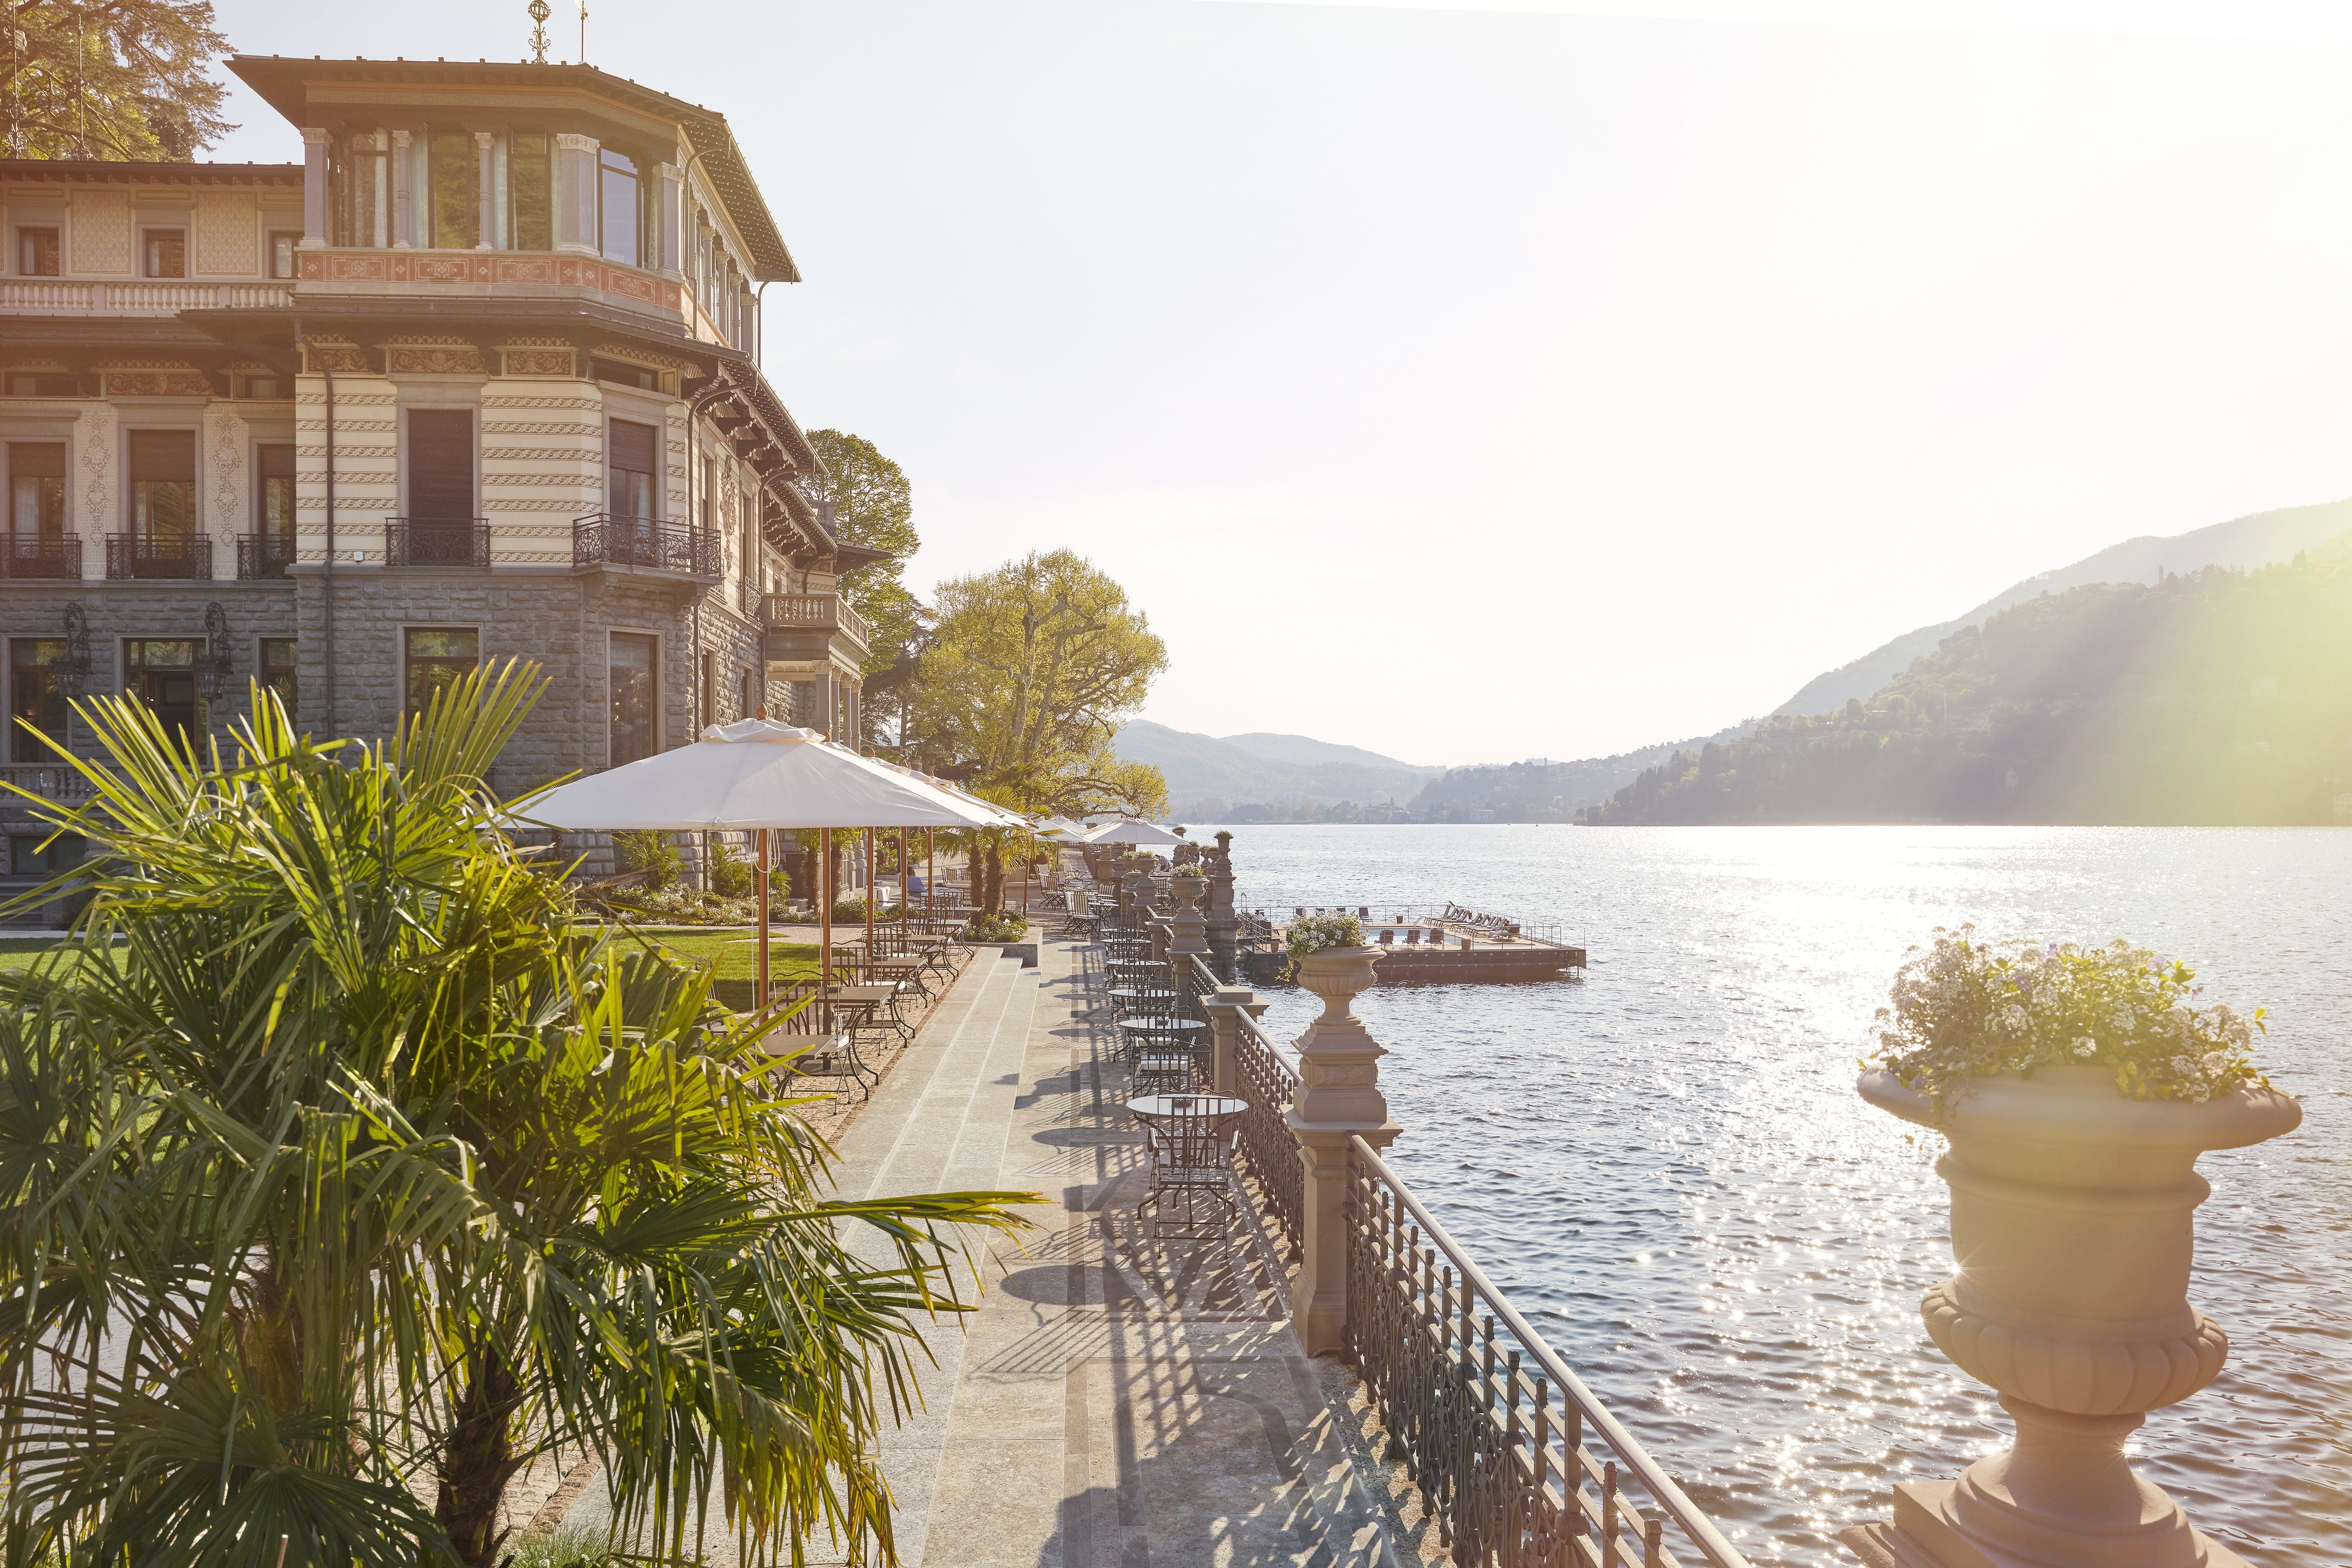 View of Lake Como from the waterfront terrace at Mandarin Oriental